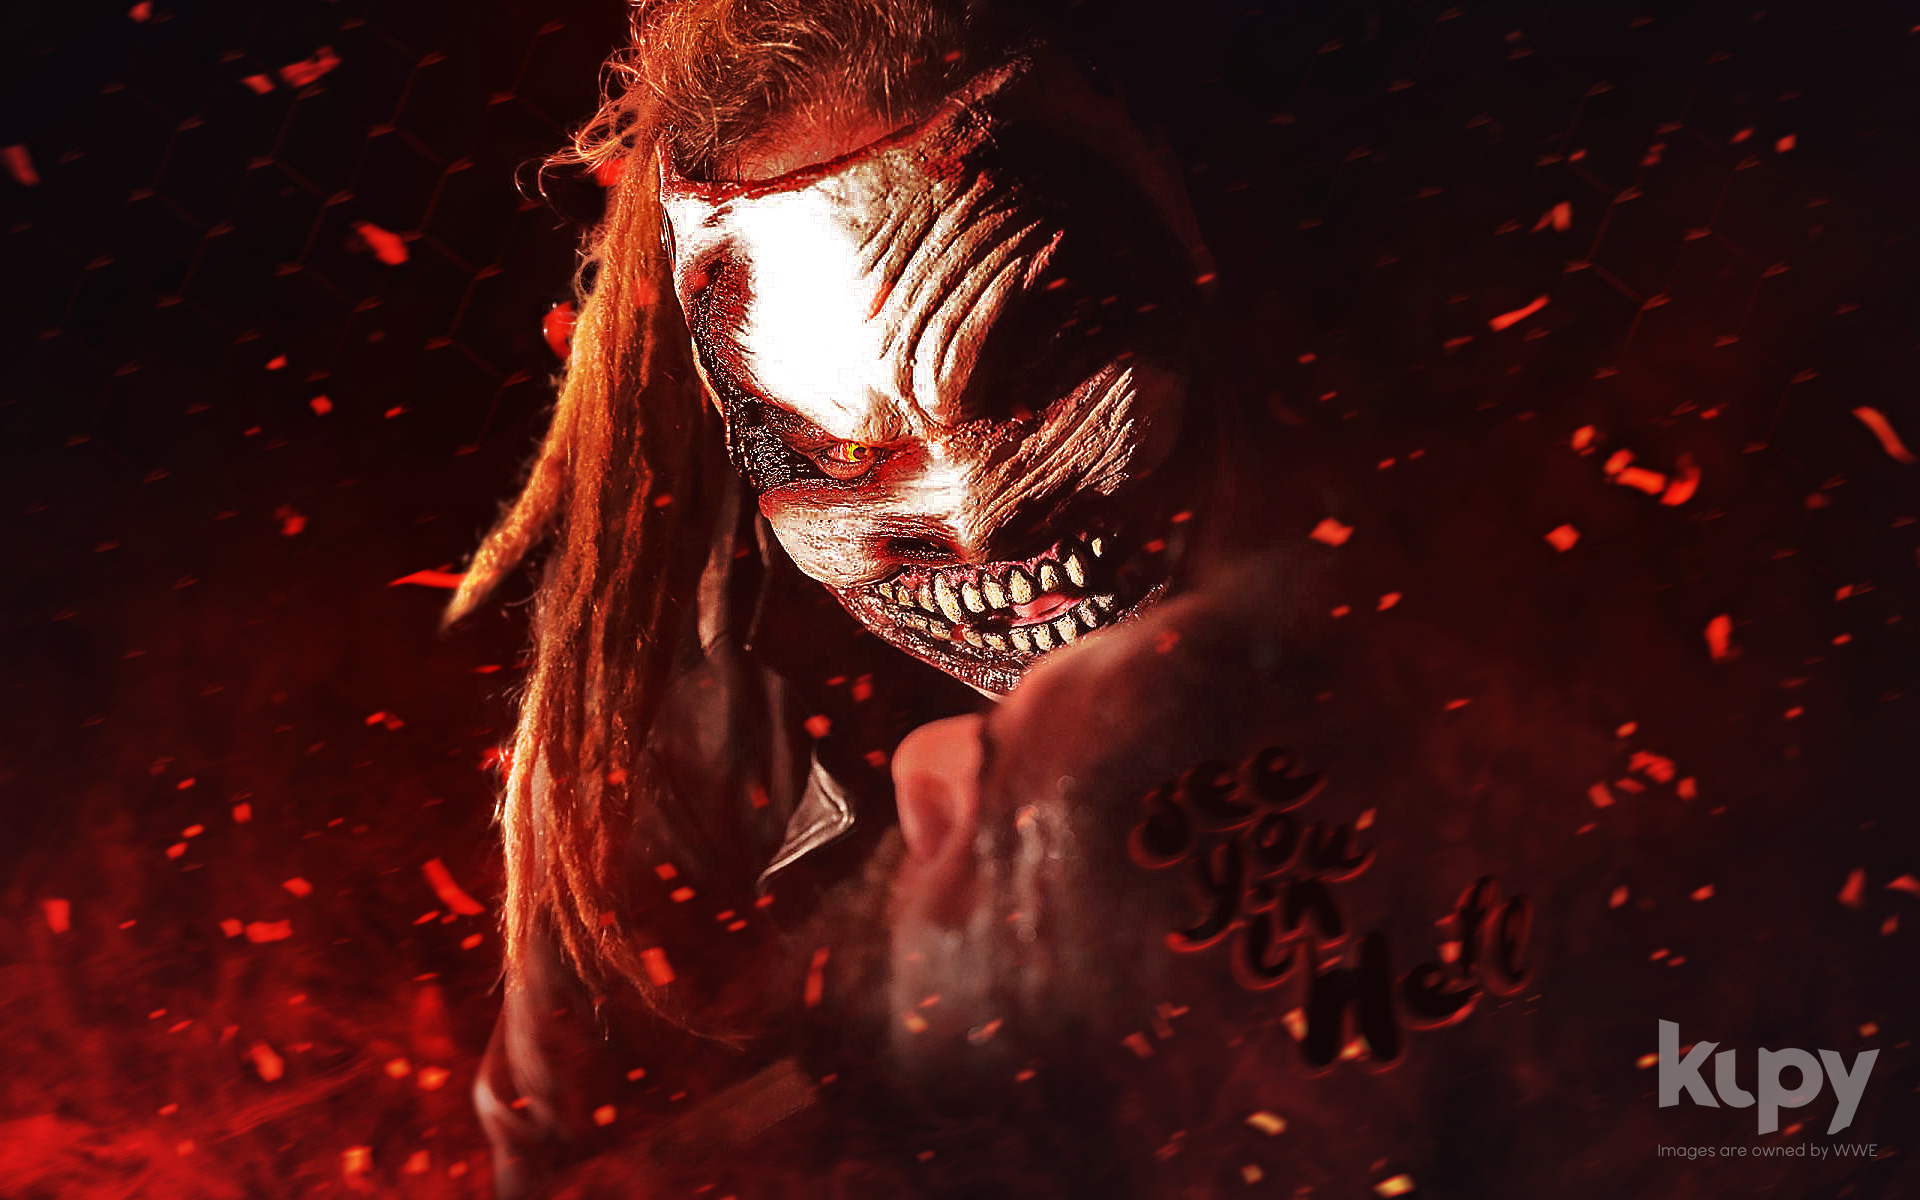 The Fiend “See You in Hell” wallpaper! - Kupy Wrestling Wallpapers